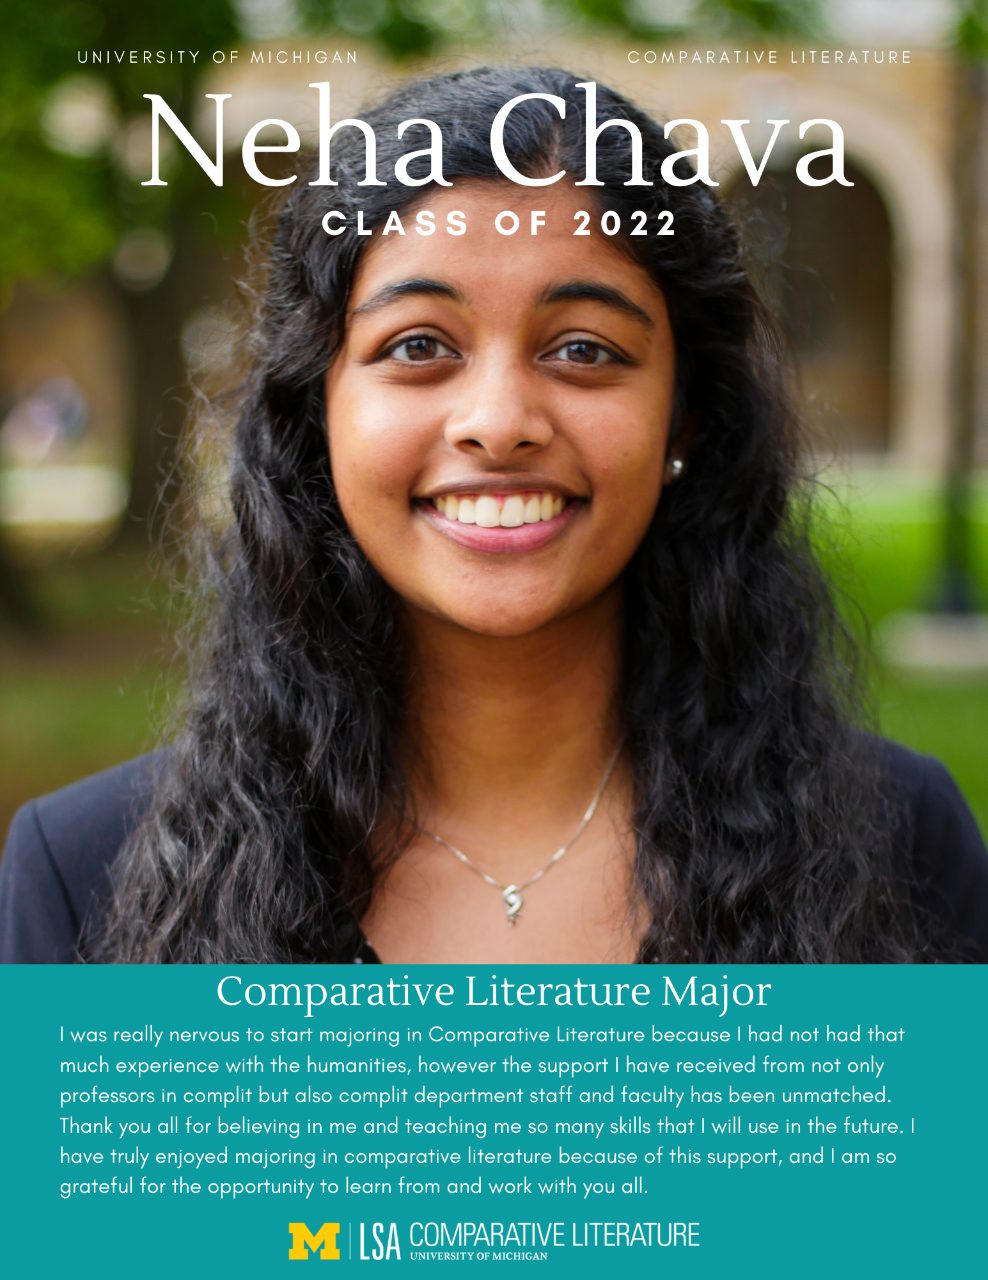 Headshot of Neha Chava with text, “University of Michigan, Comparative Literature, Neha Chava Class of 2022. Comparative Literature Major: I was really nervous to start majoring in Comparative Literature because I had not had that much experience with the humanities, however the support I have received from not only professors in complit but also complit department staff and faculty has been unmatched. Thank you all for believing in me and teaching me so many skills that I will use in the future. I have truly enjoyed majoring in comparative literature because of this support, and I am so grateful for the opportunity to learn from and work with you all”